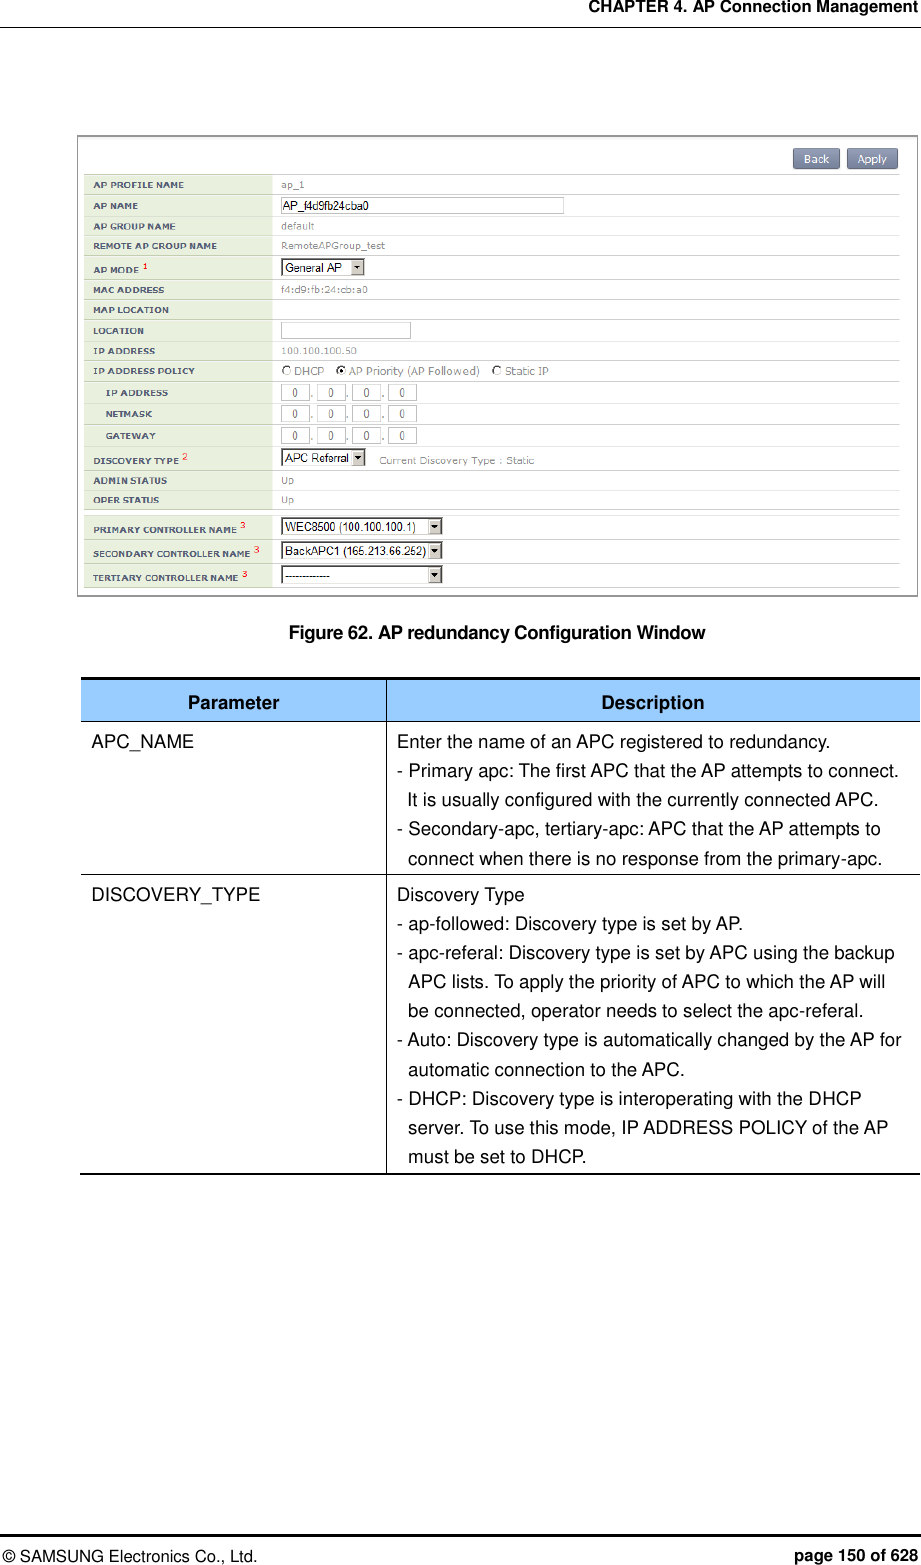 CHAPTER 4. AP Connection Management ©  SAMSUNG Electronics Co., Ltd.  page 150 of 628   Figure 62. AP redundancy Configuration Window  Parameter Description APC_NAME Enter the name of an APC registered to redundancy. - Primary apc: The first APC that the AP attempts to connect.   It is usually configured with the currently connected APC. - Secondary-apc, tertiary-apc: APC that the AP attempts to connect when there is no response from the primary-apc. DISCOVERY_TYPE Discovery Type - ap-followed: Discovery type is set by AP. - apc-referal: Discovery type is set by APC using the backup APC lists. To apply the priority of APC to which the AP will be connected, operator needs to select the apc-referal. - Auto: Discovery type is automatically changed by the AP for automatic connection to the APC. - DHCP: Discovery type is interoperating with the DHCP server. To use this mode, IP ADDRESS POLICY of the AP must be set to DHCP.  